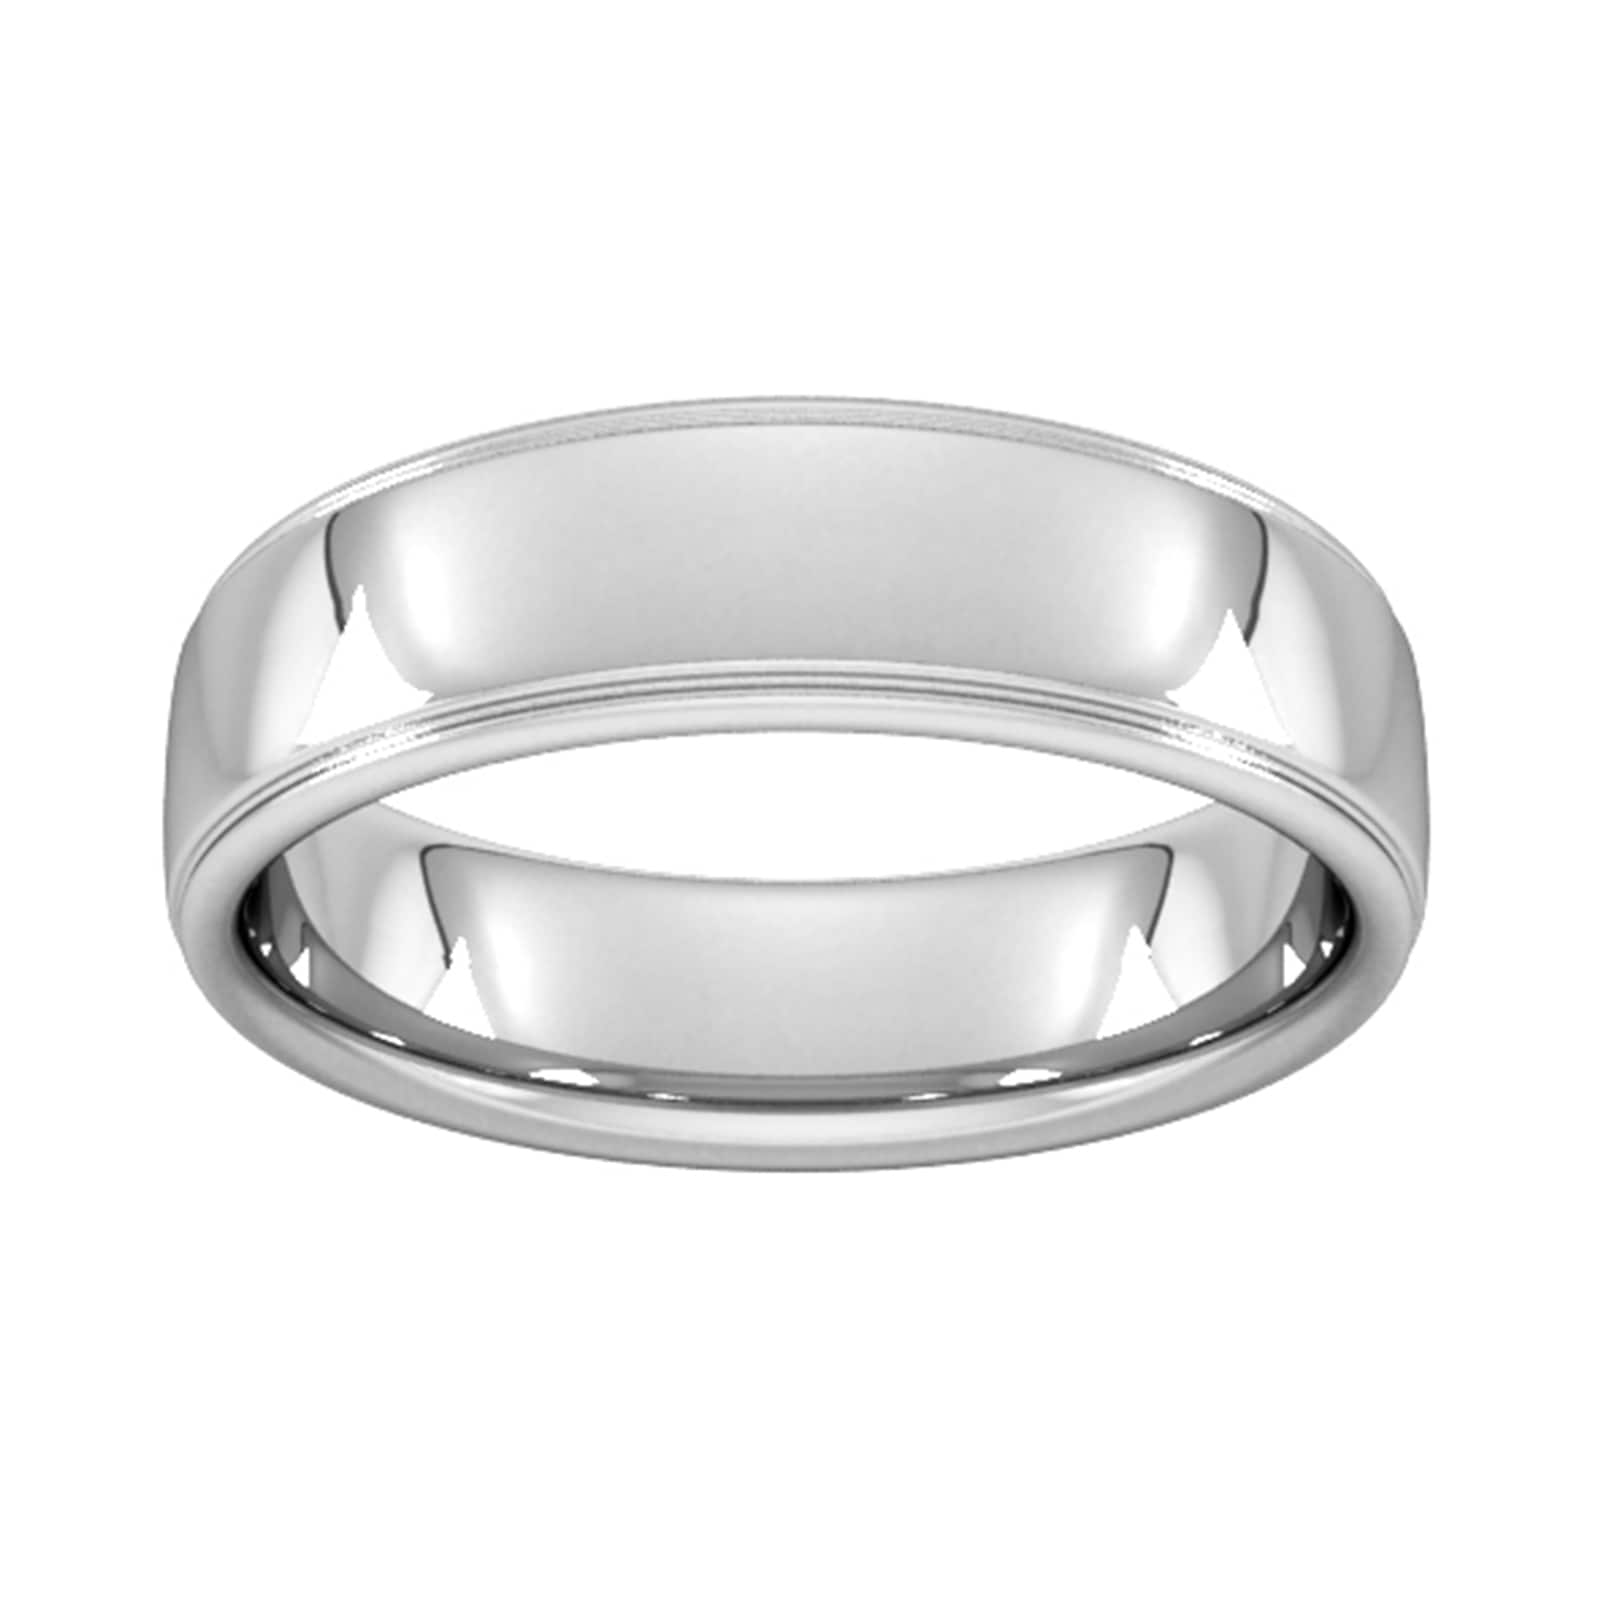 6mm Slight Court Heavy Polished Finish With Grooves Wedding Ring In 9 Carat White Gold - Ring Size O